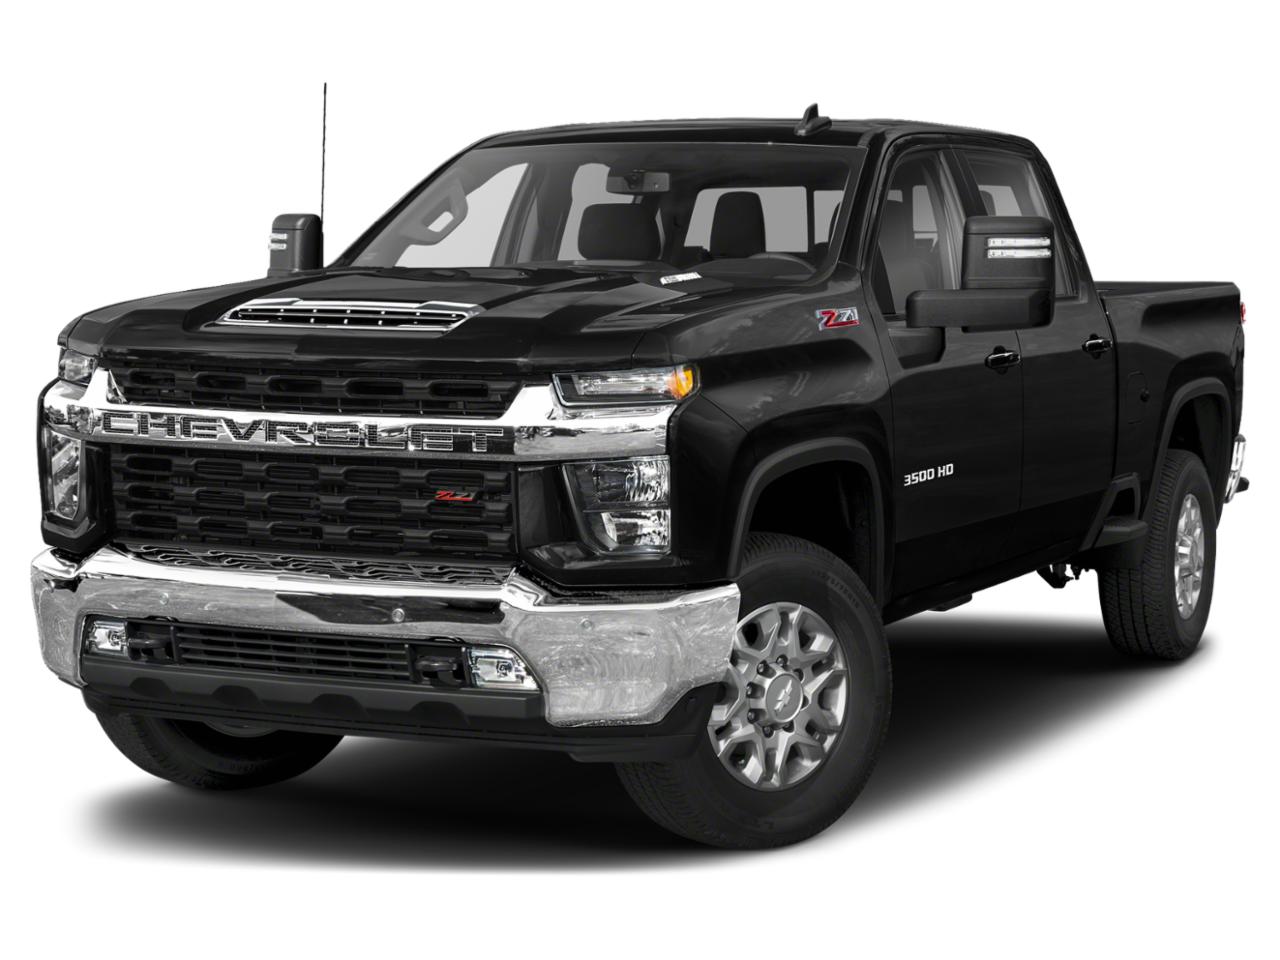 New 2022 Black Chevrolet Silverado 3500HD High Country For Sale in